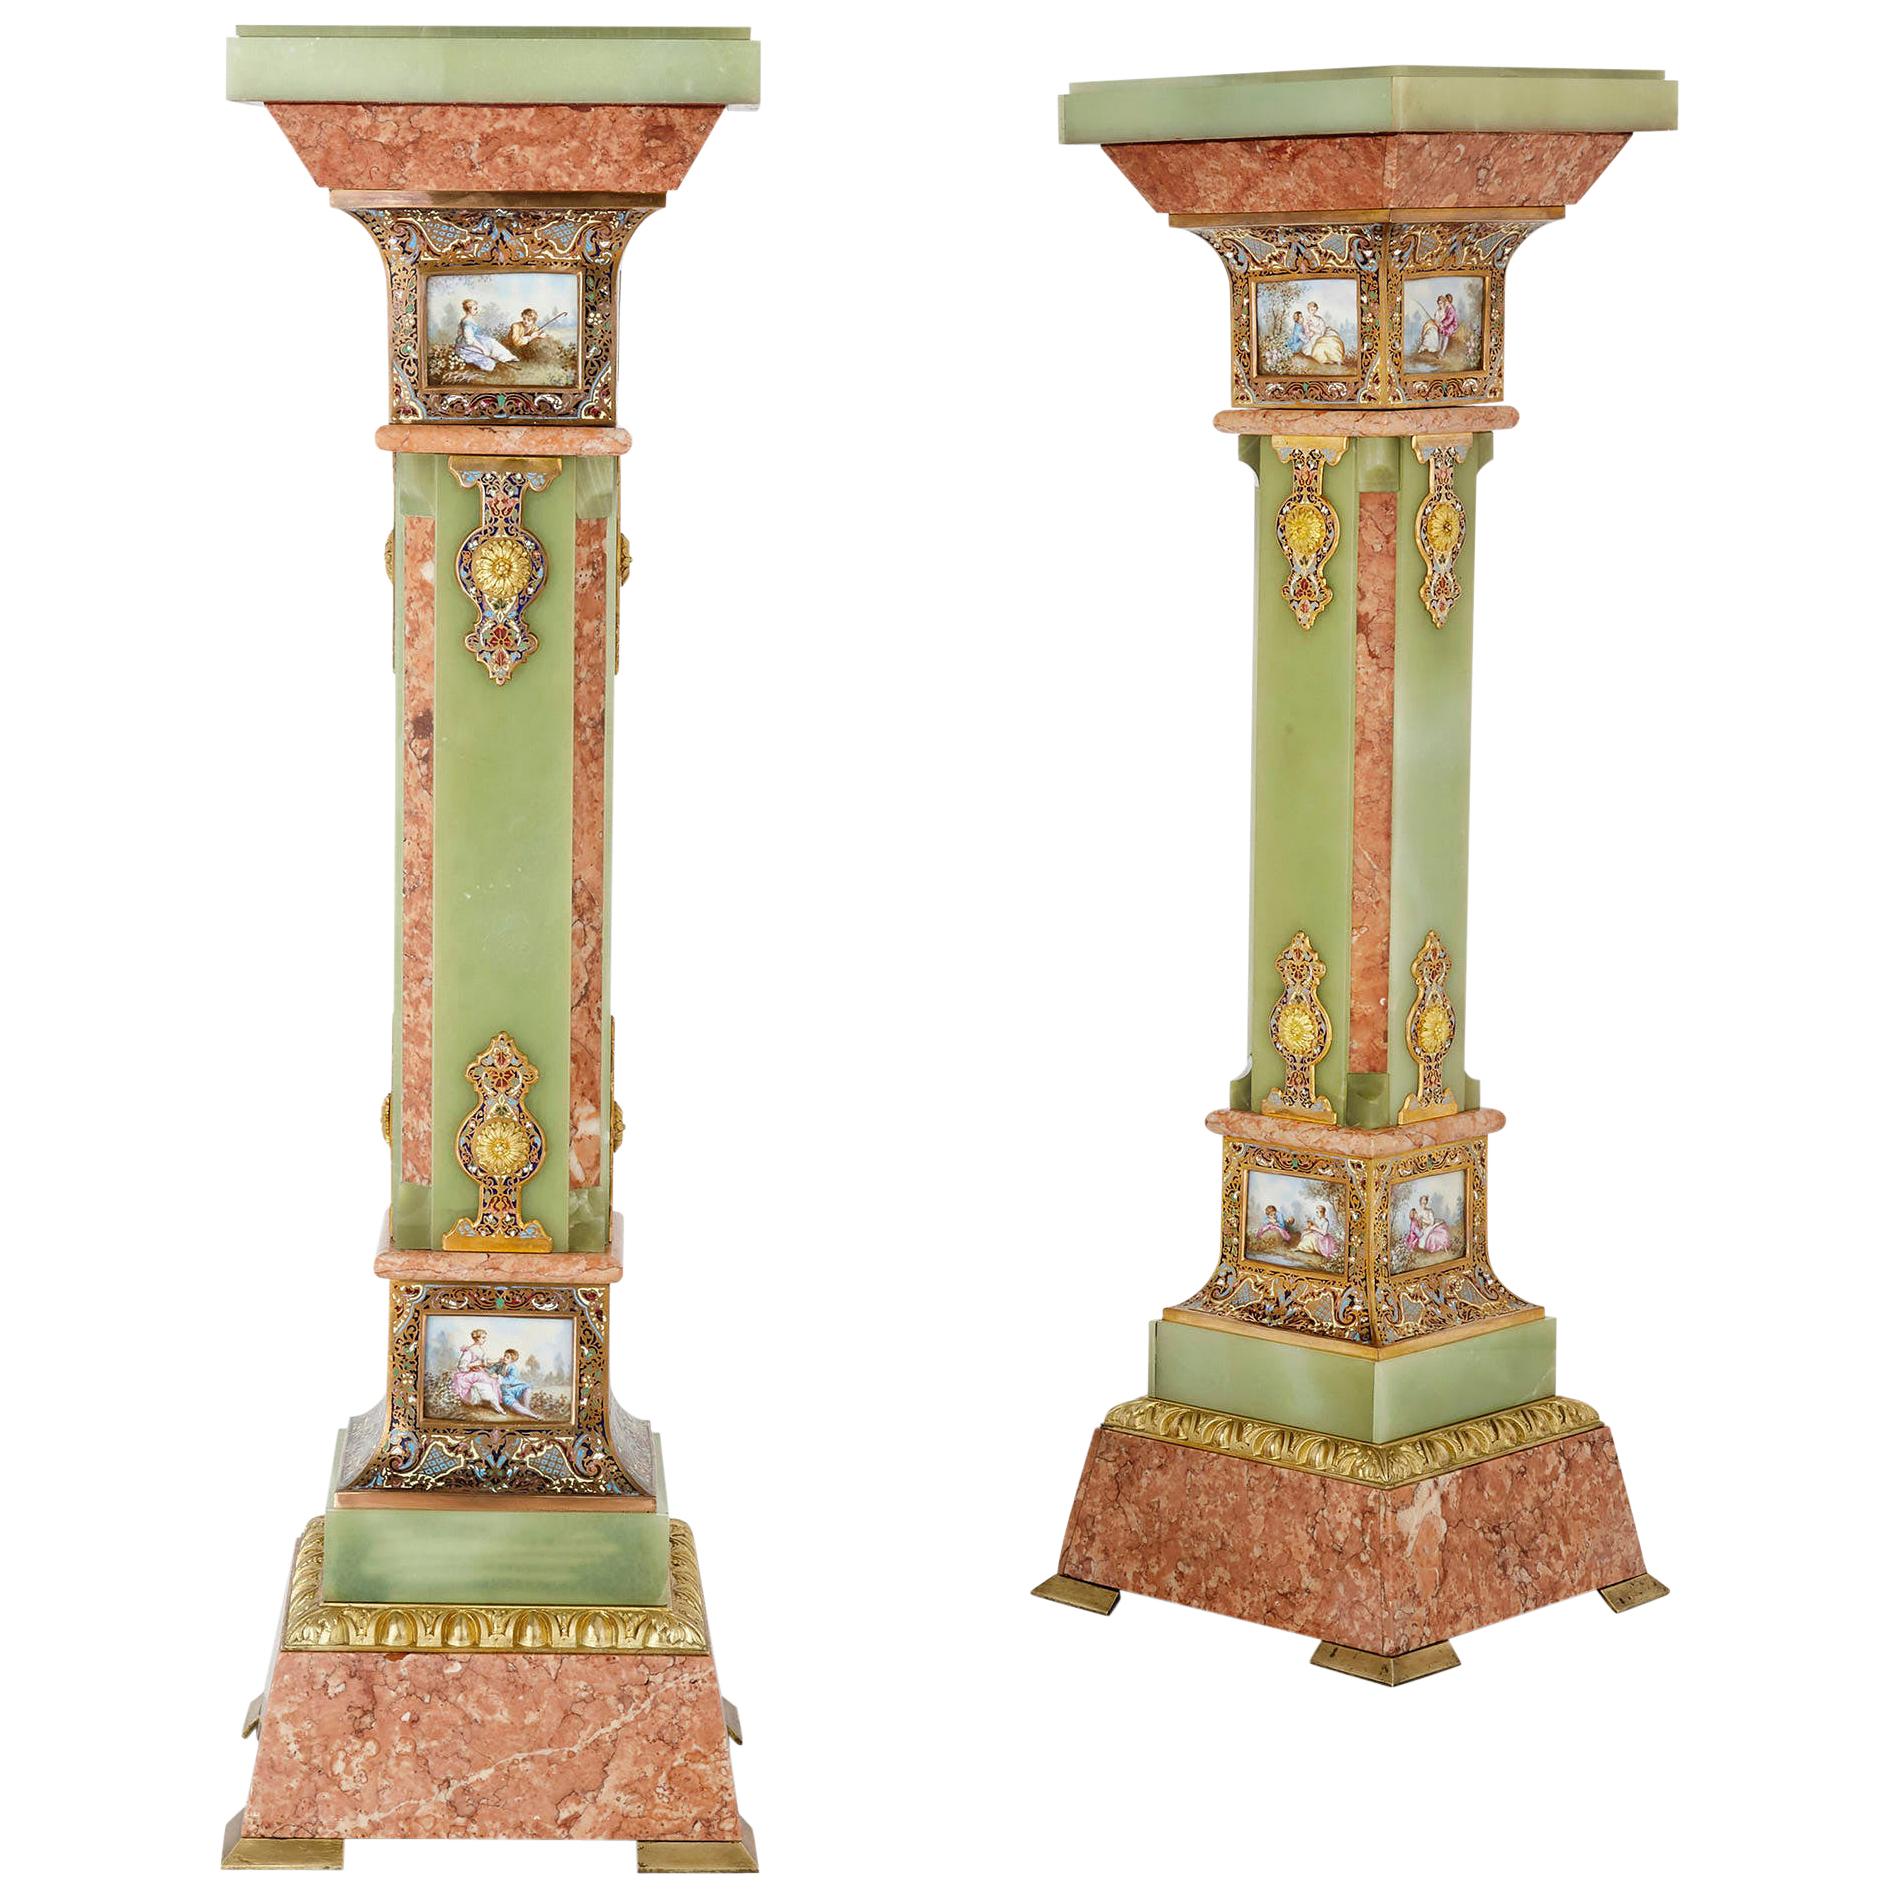 Pair of Antique Eclectic Style Onyx and Marble Pedestals For Sale